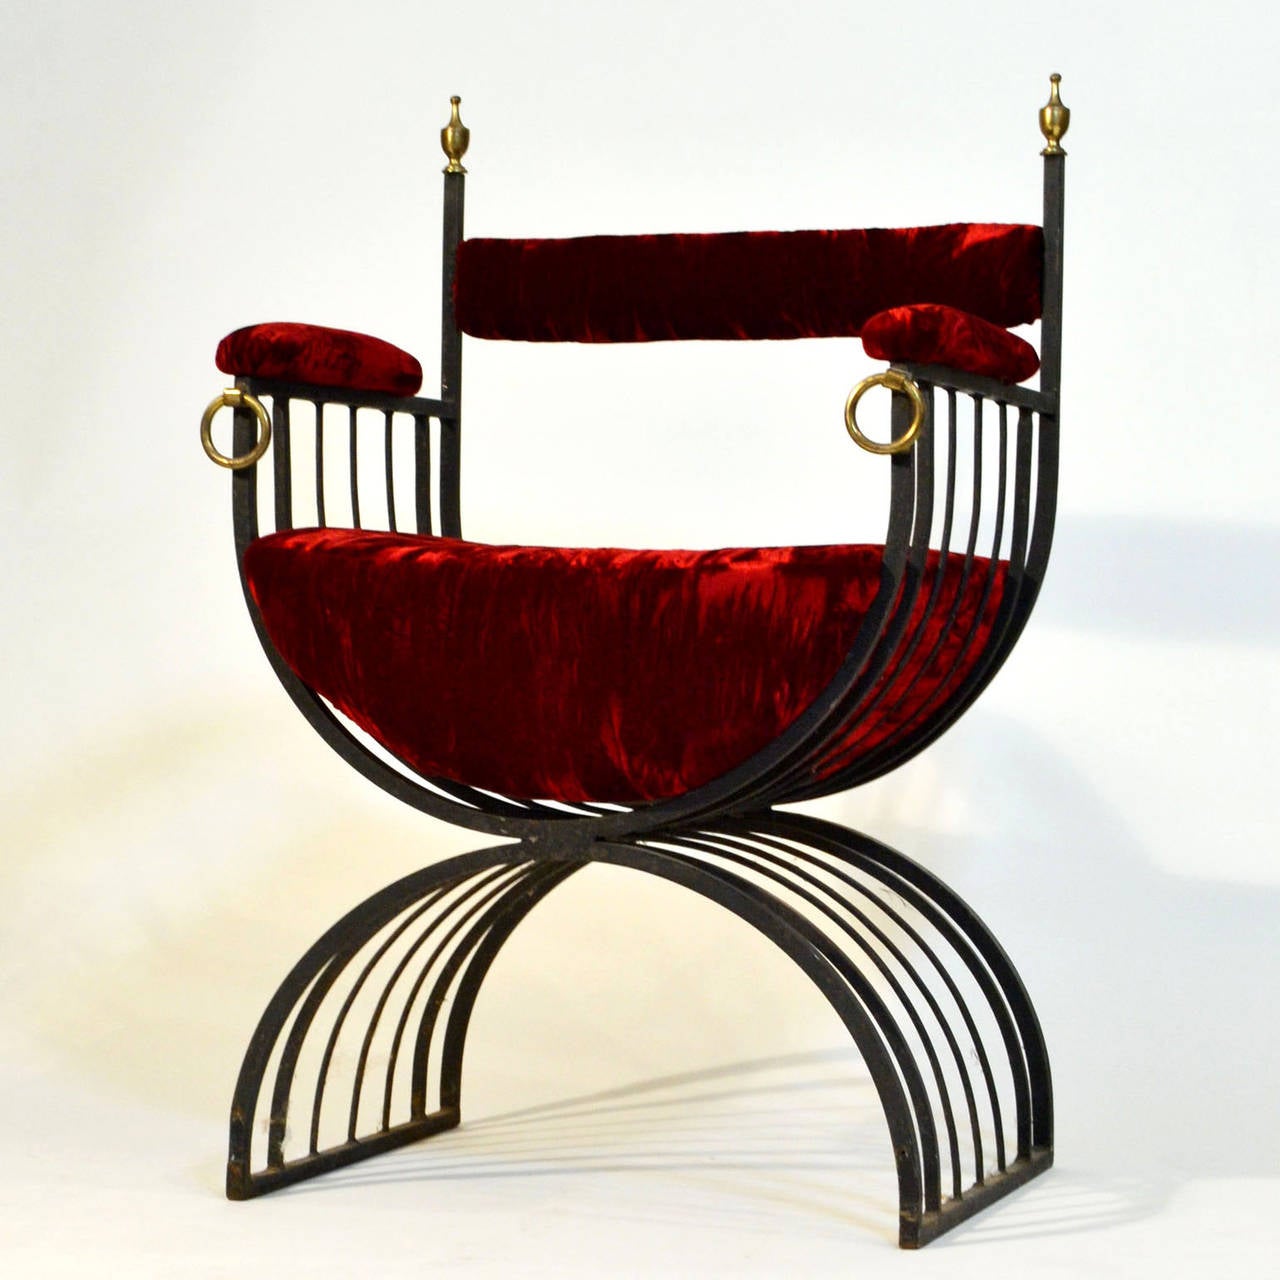 Forged metal chair with brass details re upholstered in ruby crushed velvet.